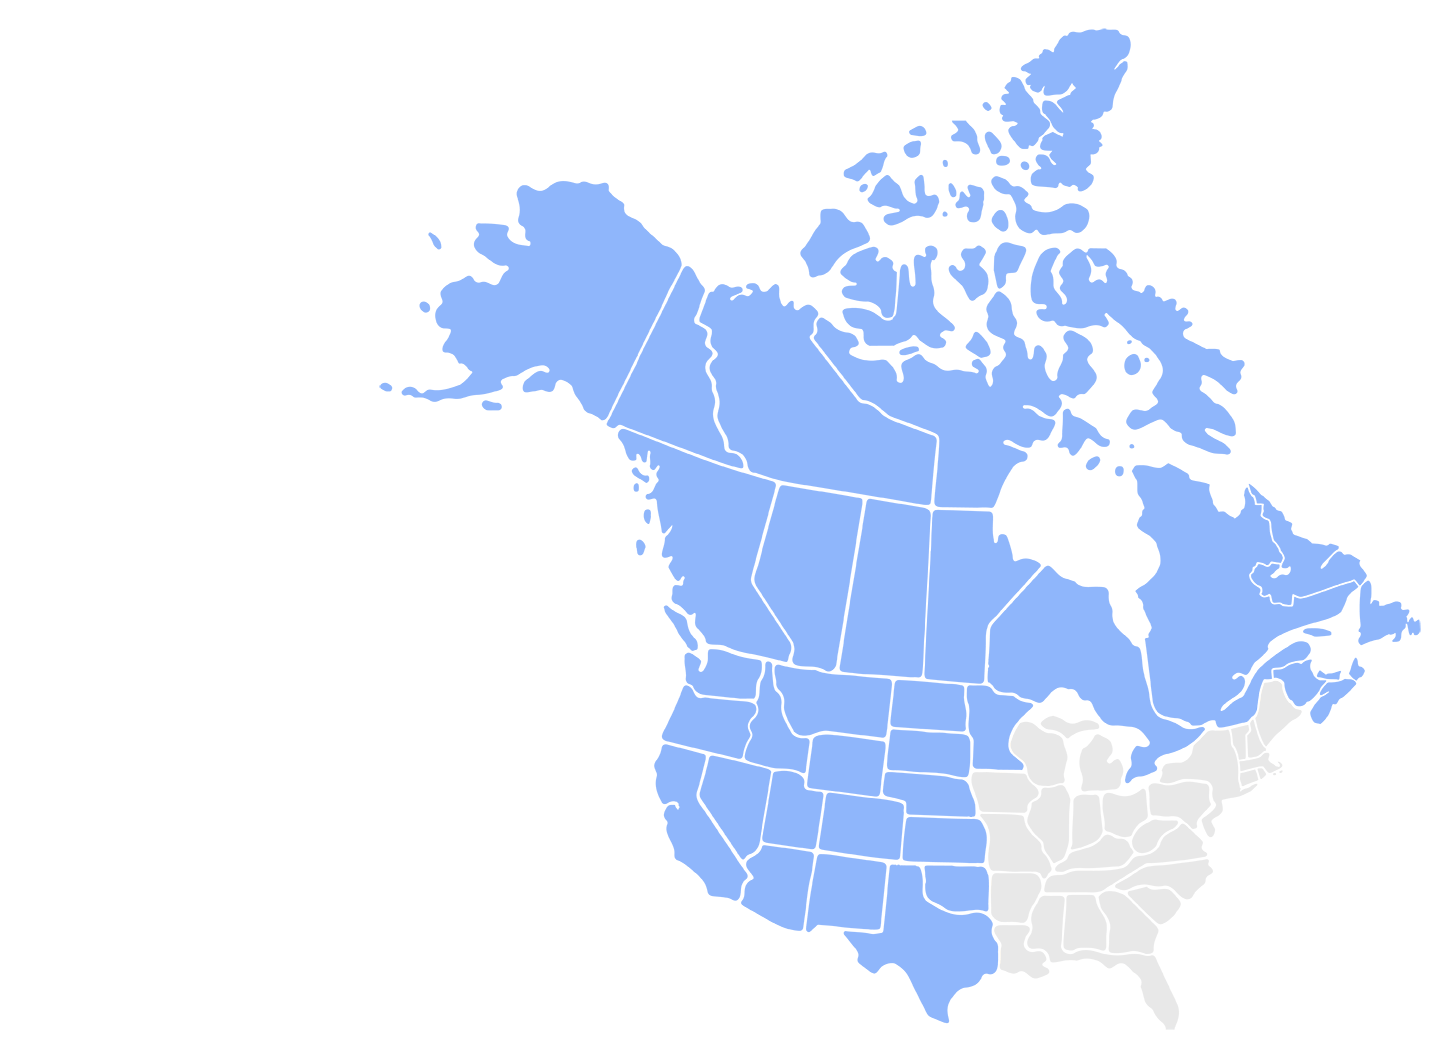 US and Canada map with the western regions highlighted in blue